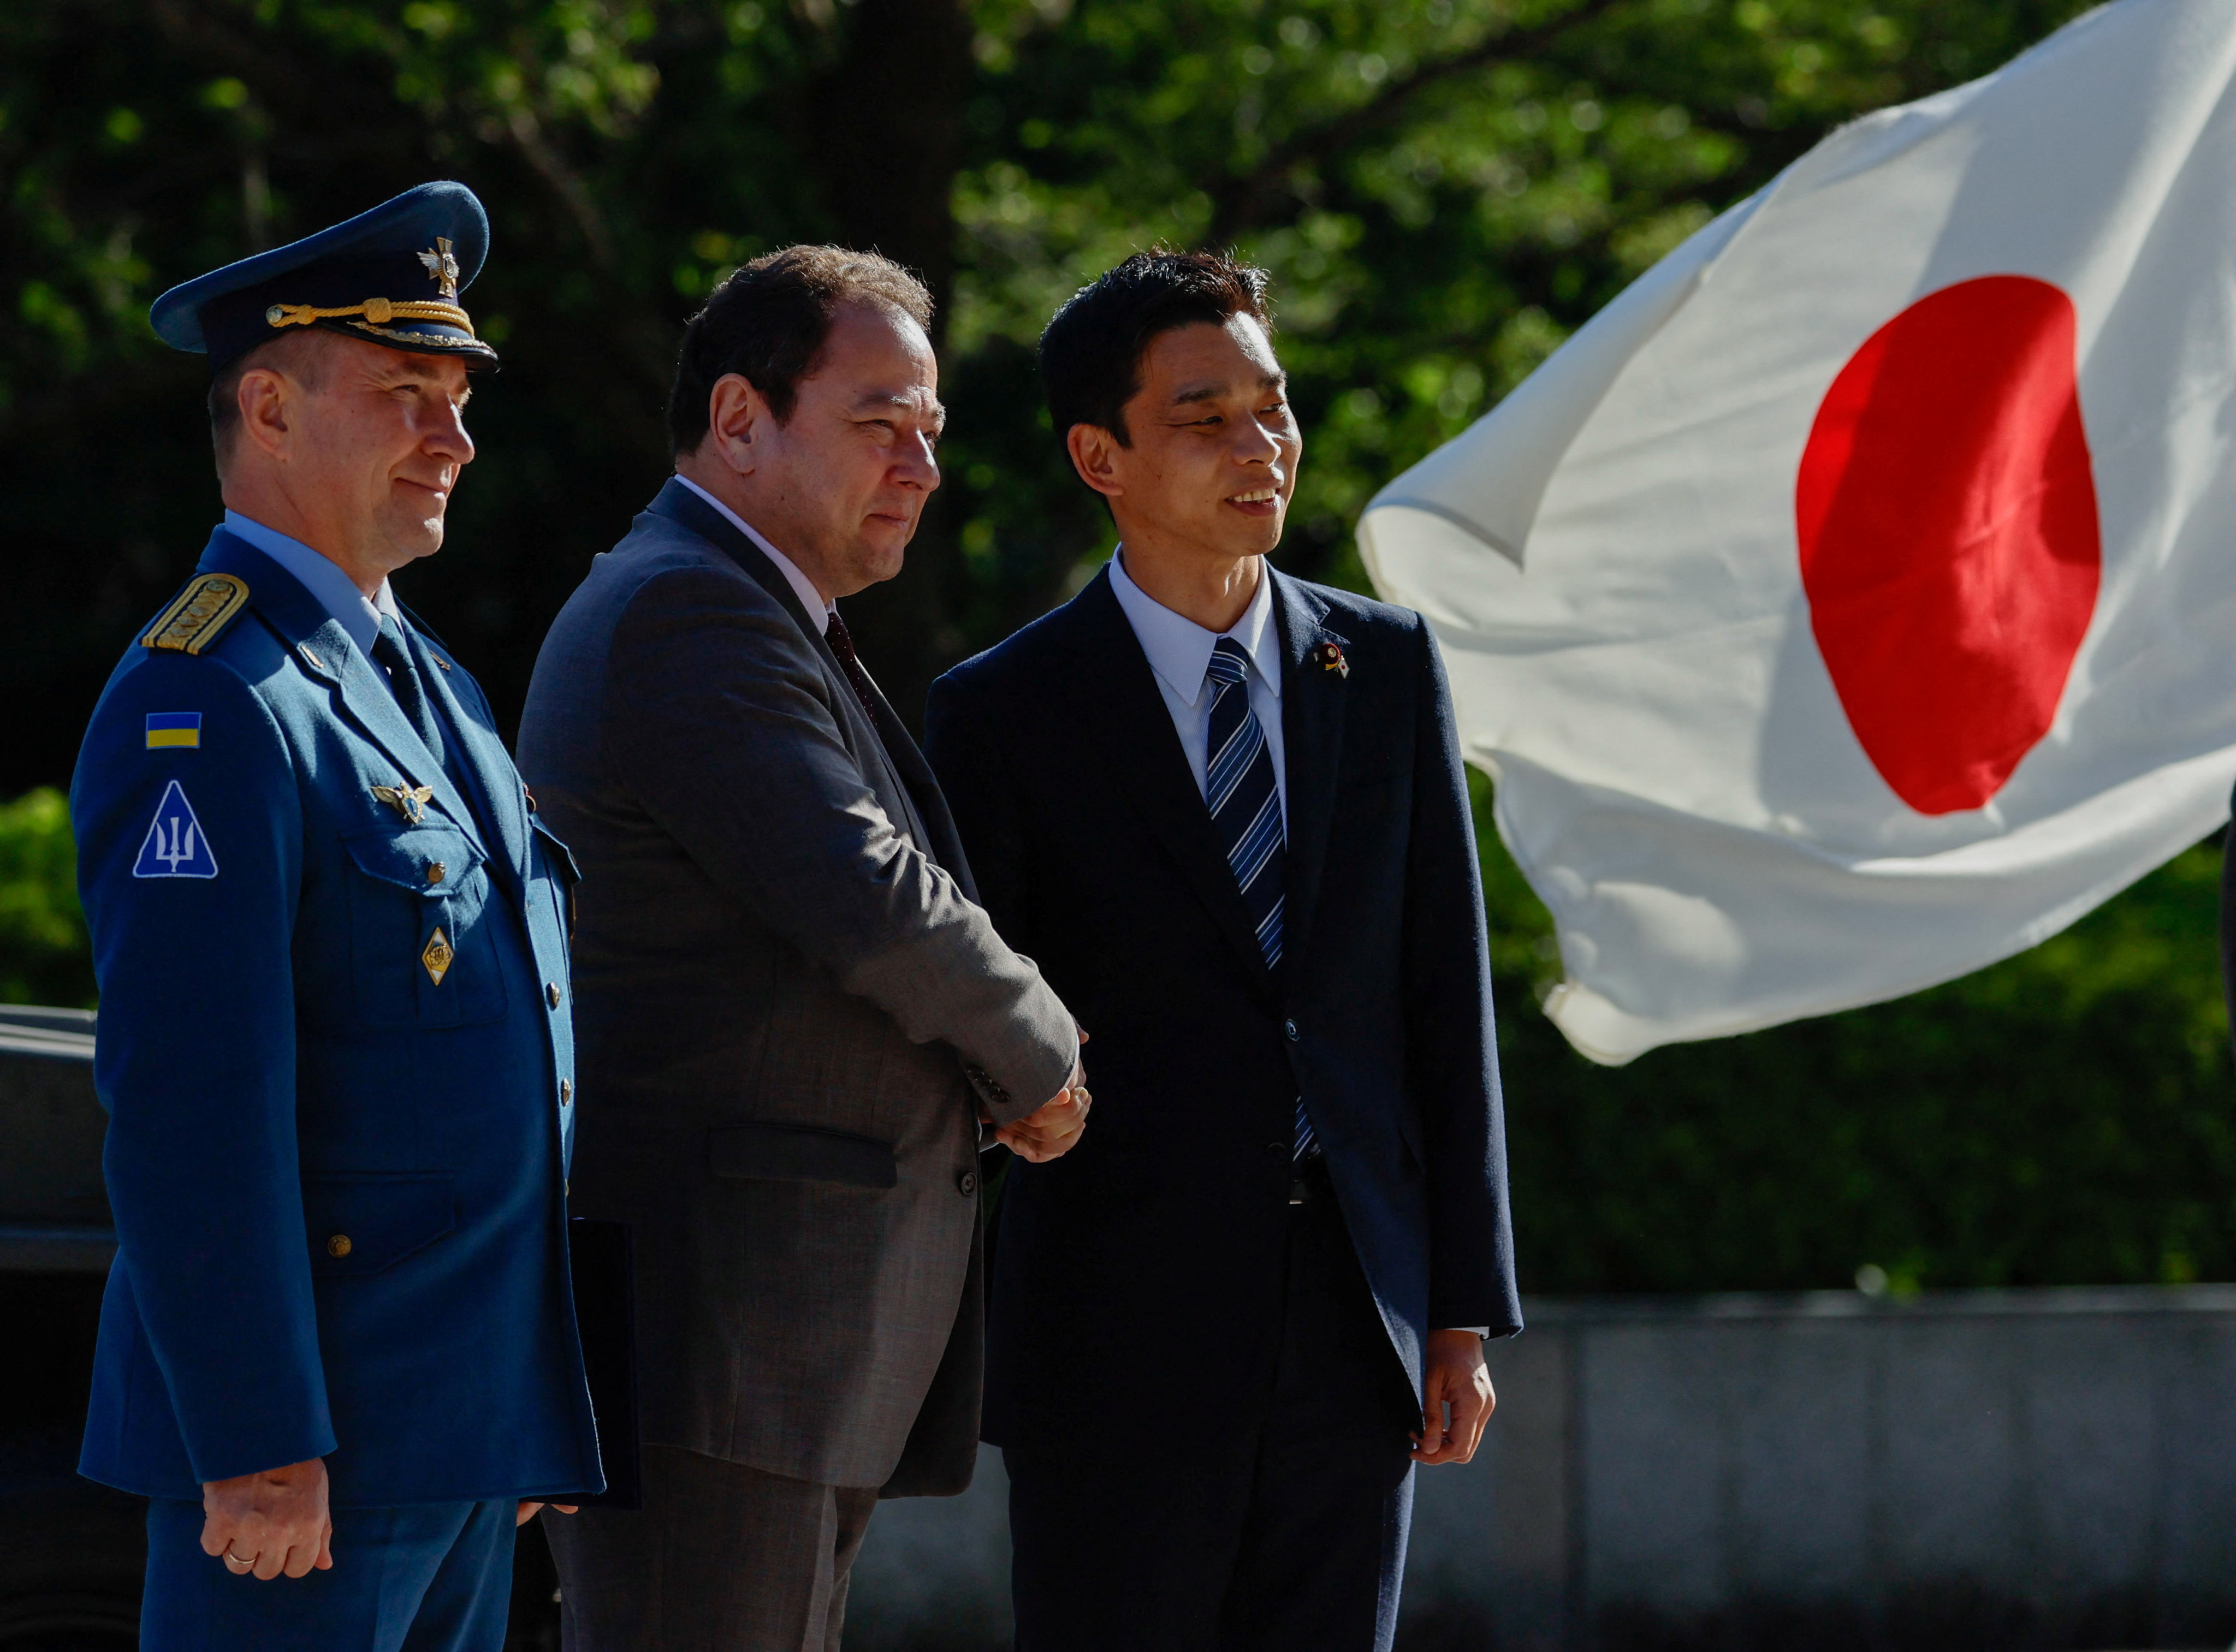 Ukraine’s ambassador to Japan Sergiy Korsunsky and Japan’s State Minister of Defence Toshiro Ino attend a handover ceremony of Japanese Self-Defence Force’s vehicles to Ukraine. Photo: Reuters